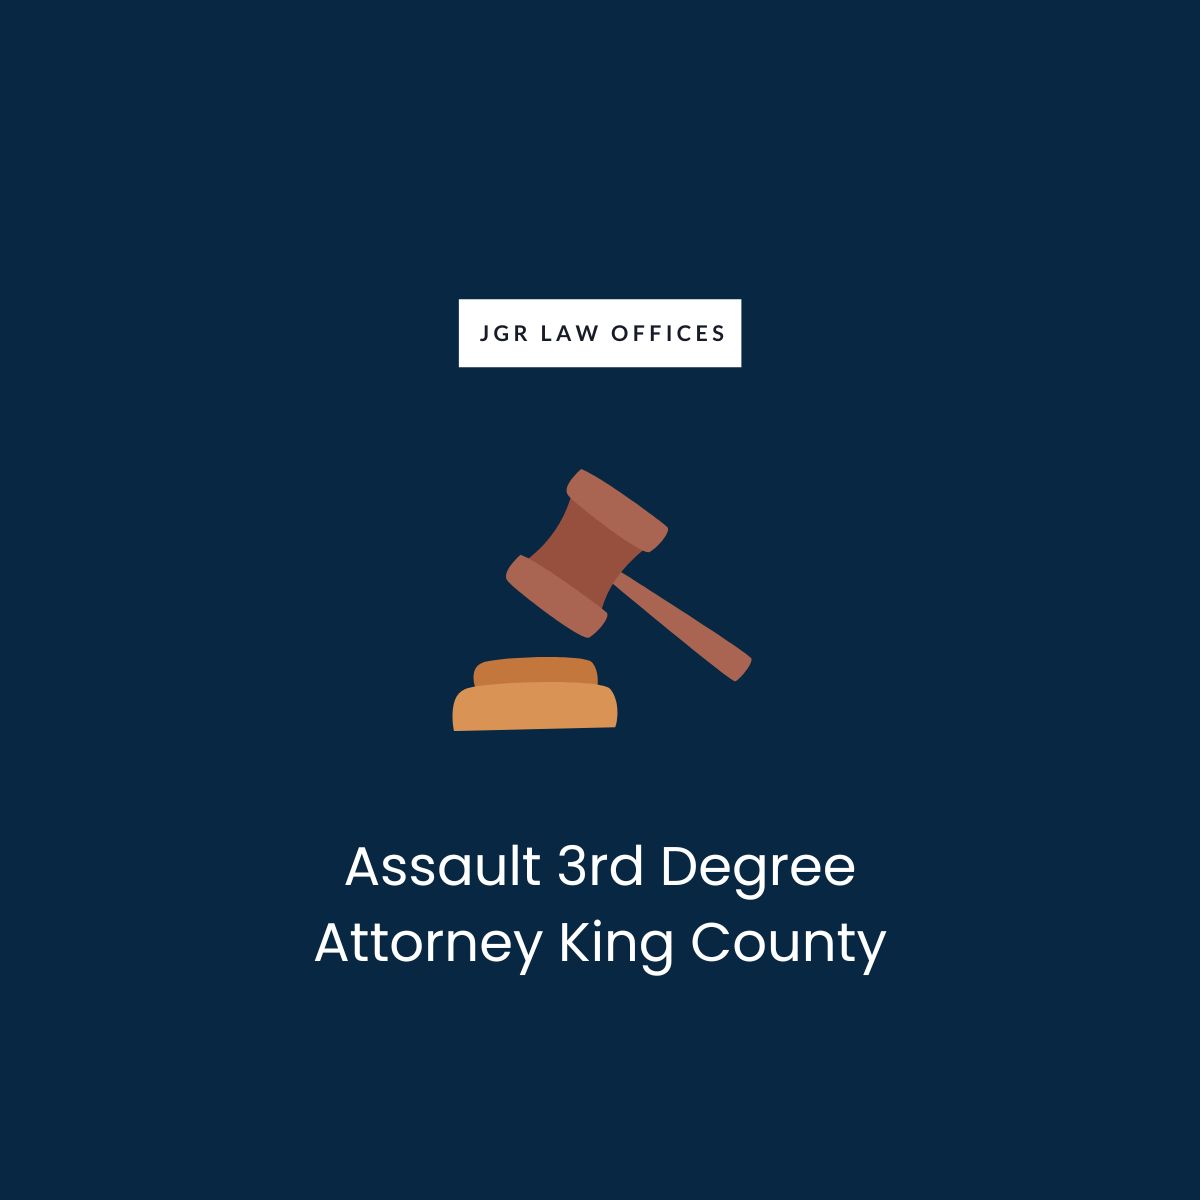 Assault 3rd Degree Attorney King County